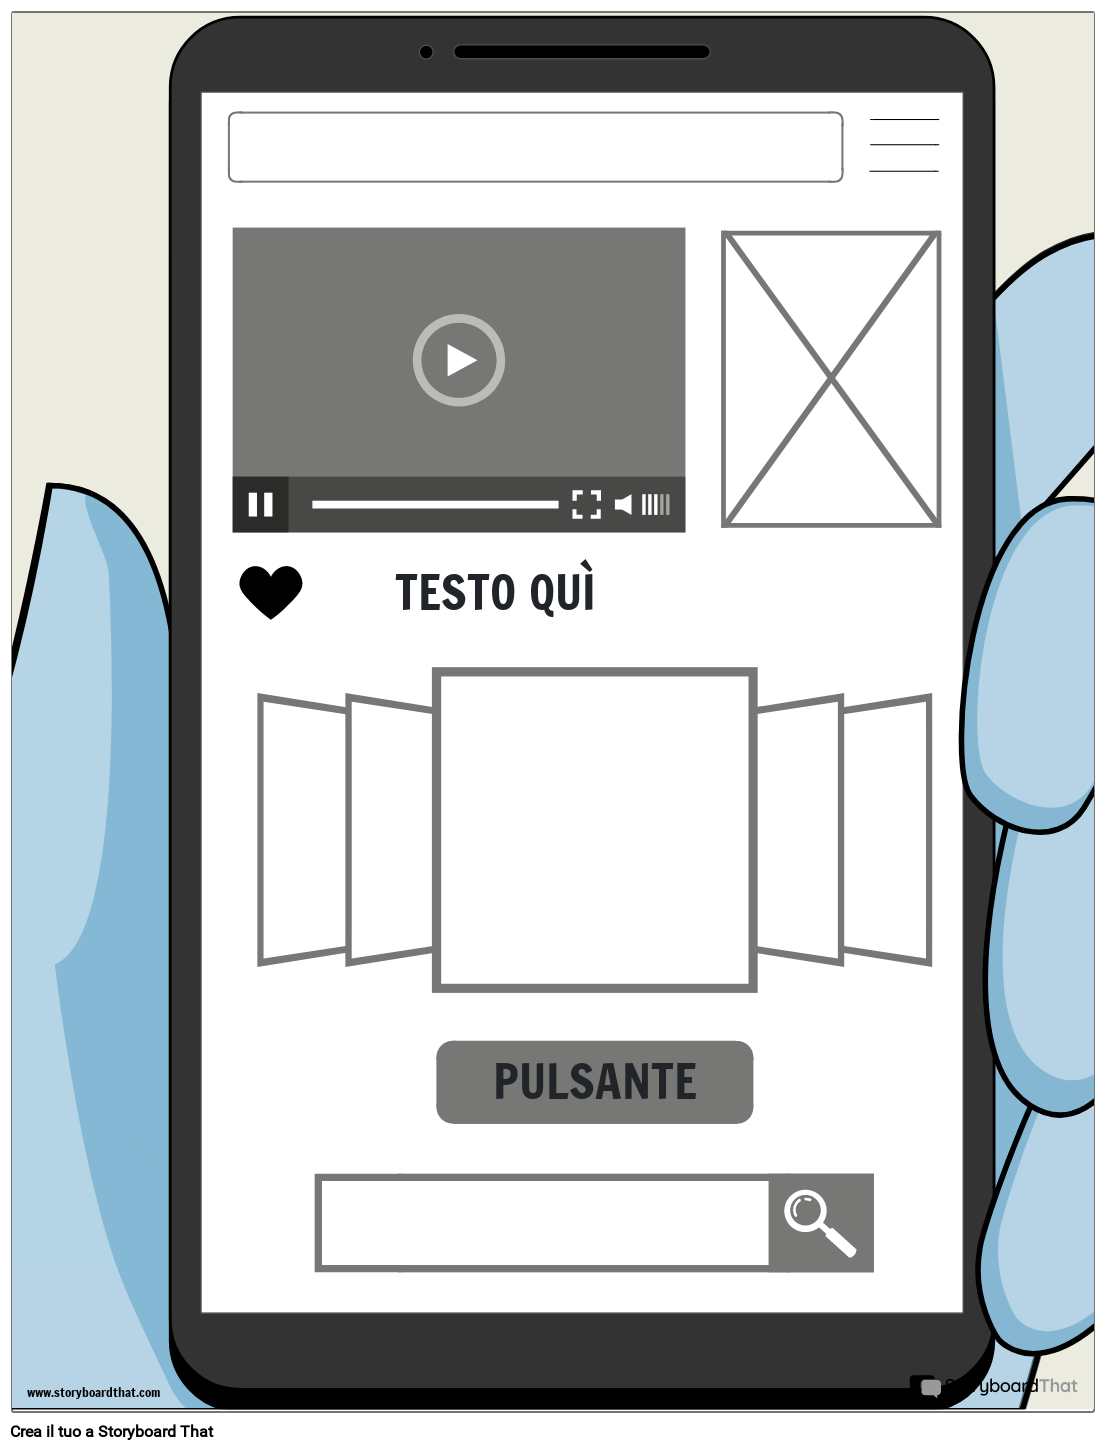 Wireframe UX 2